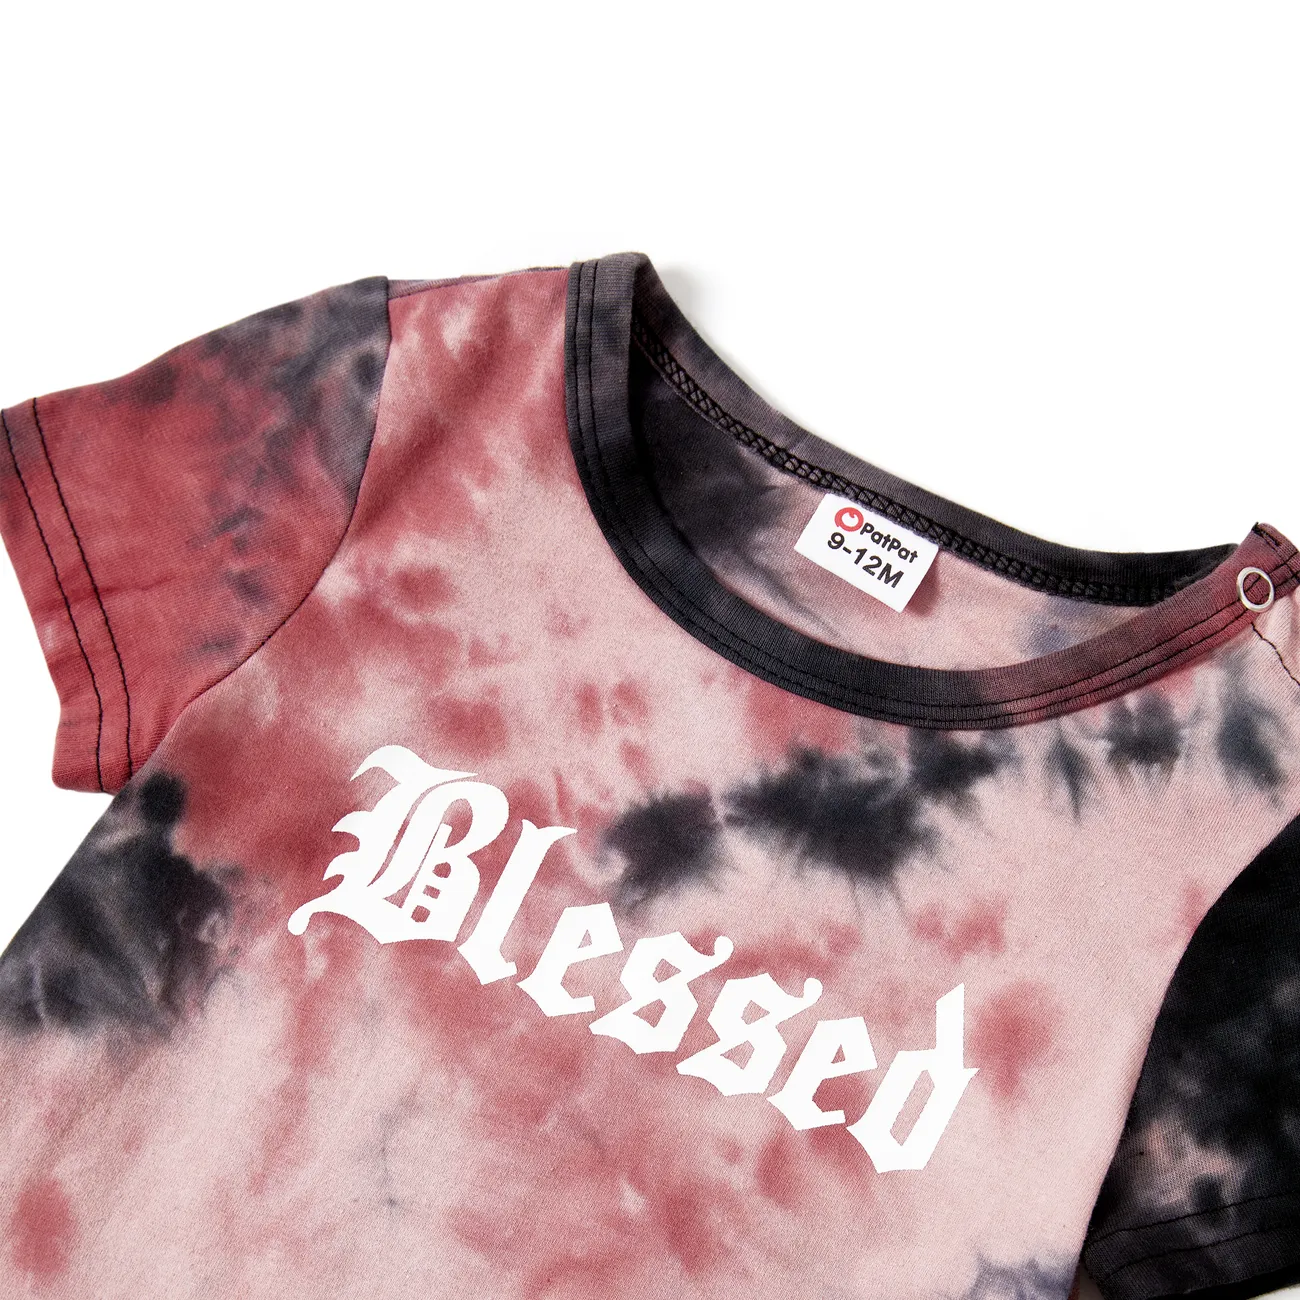 Mommy and Me Blessed Theme Tie-Dye Short Sleeves Cotton Tops redblack big image 1